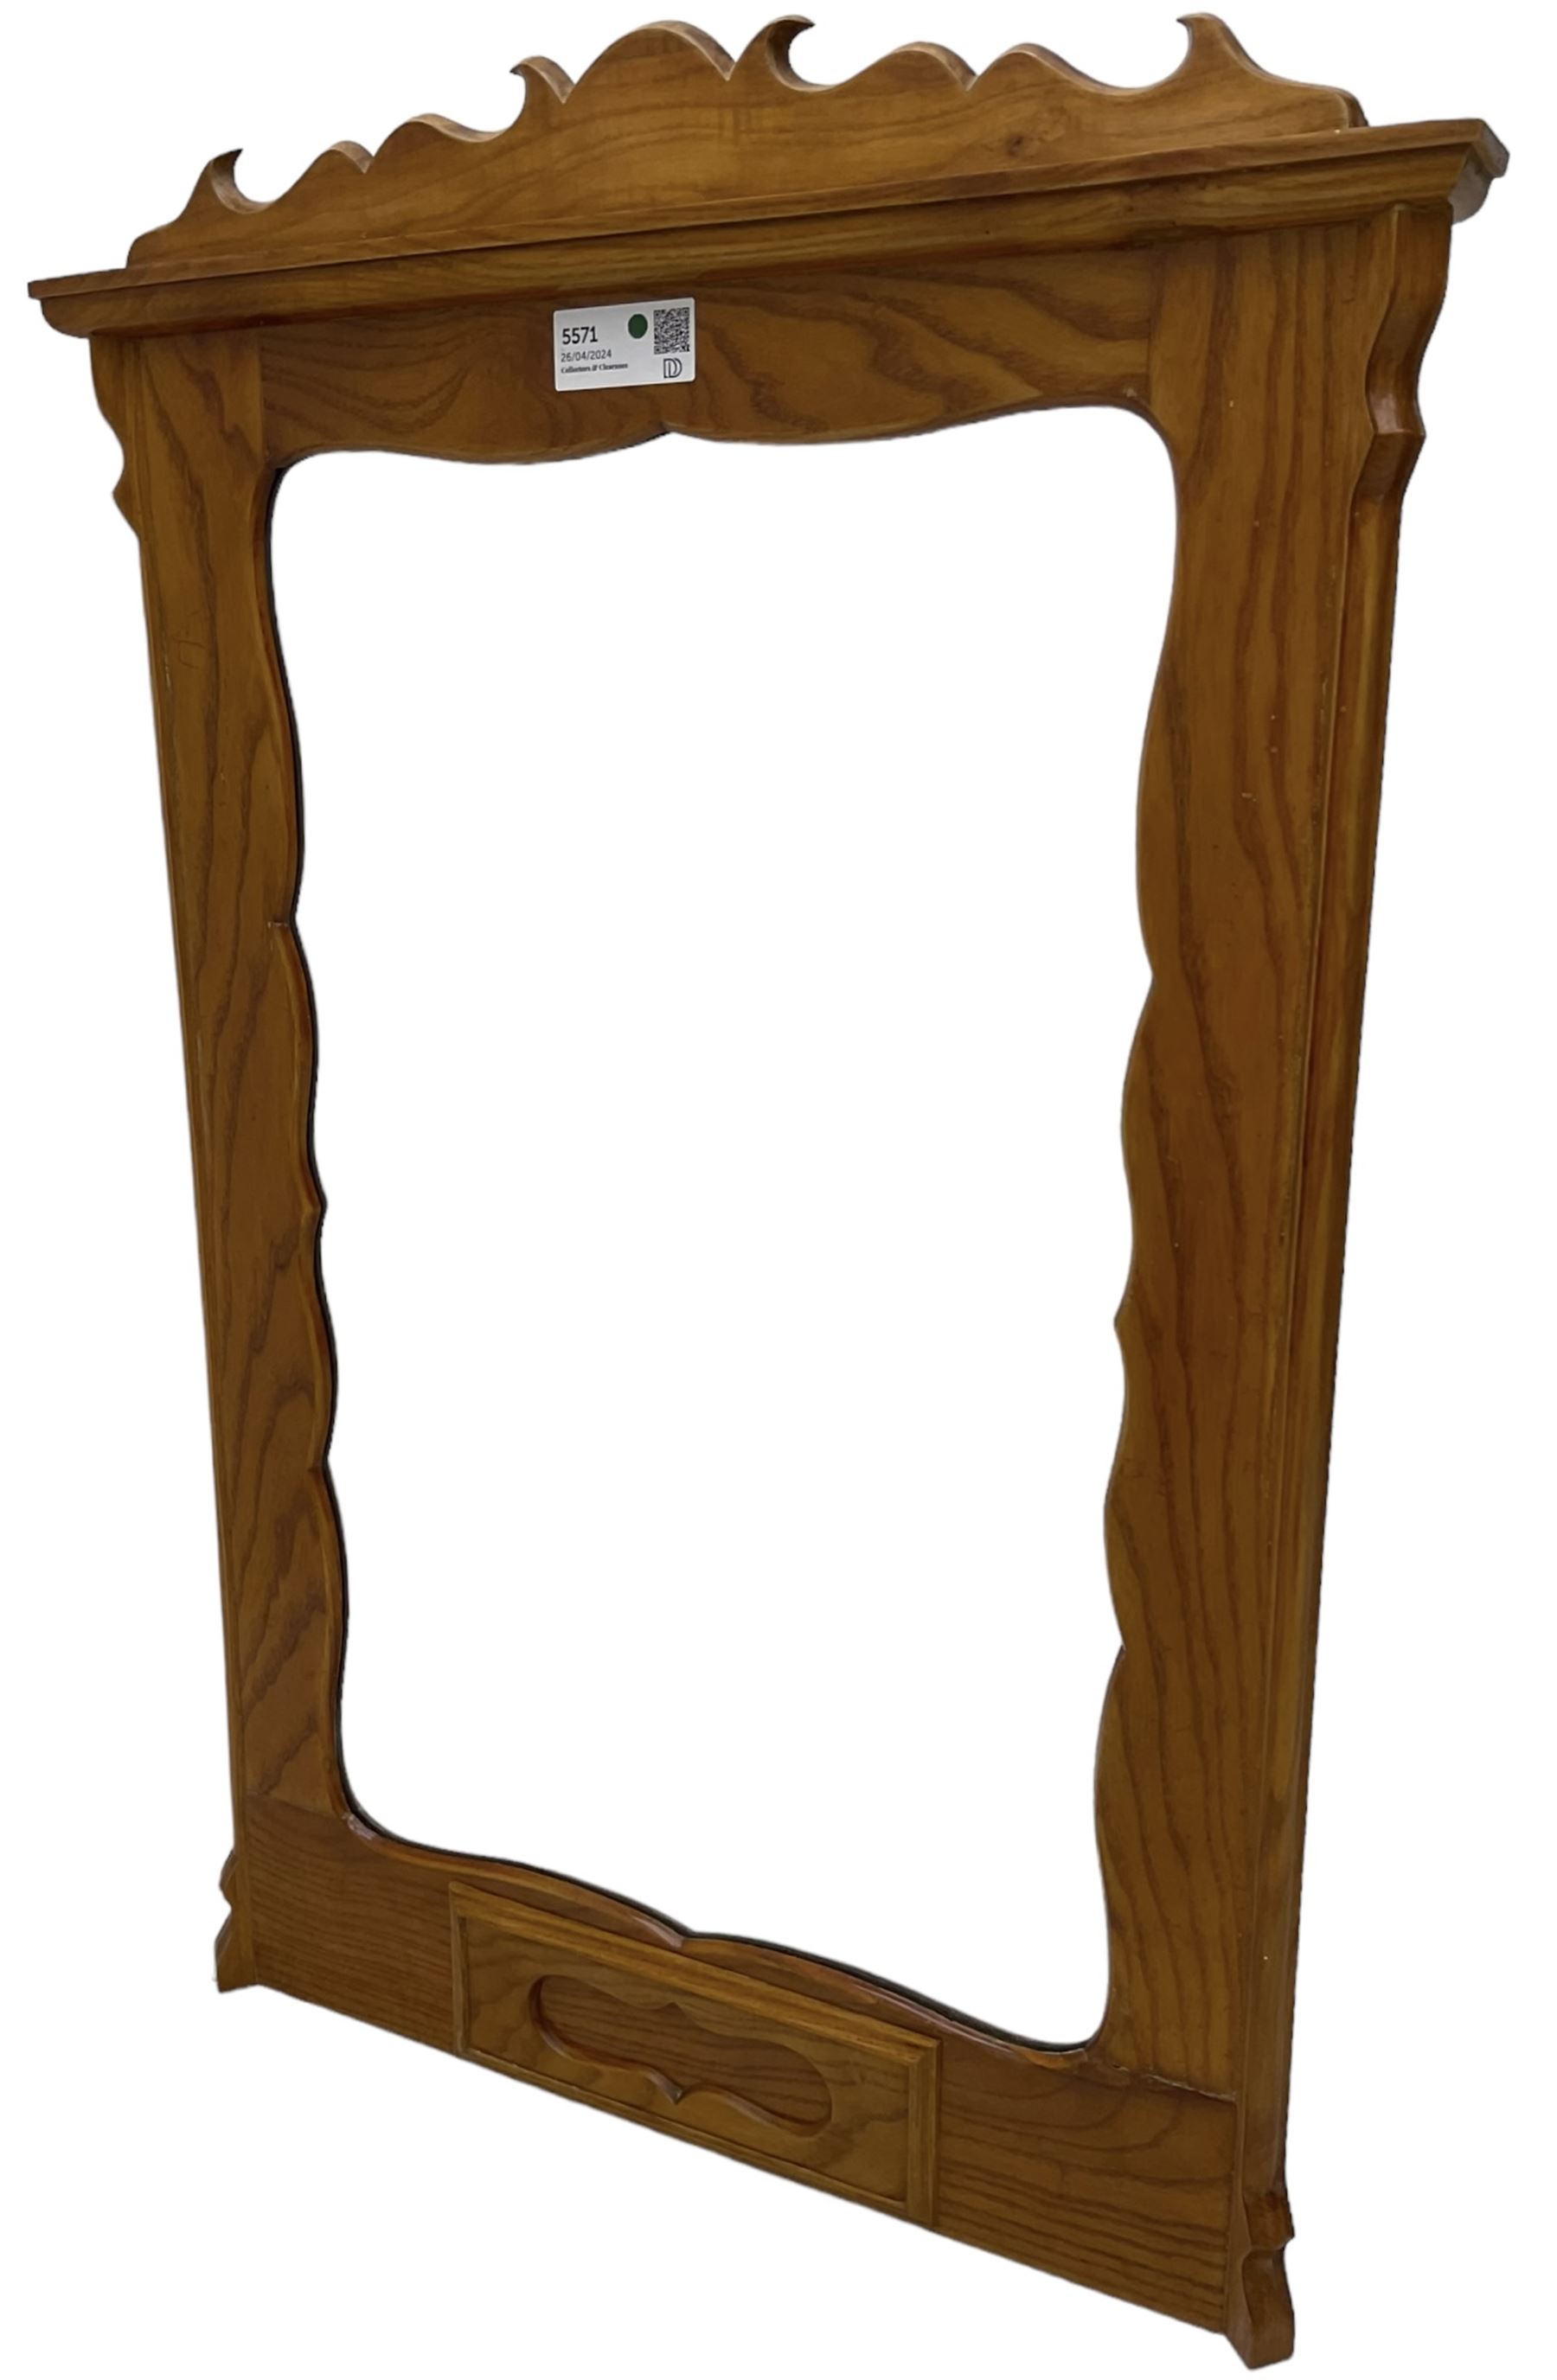 Elm wall hanging mirror - Image 2 of 3